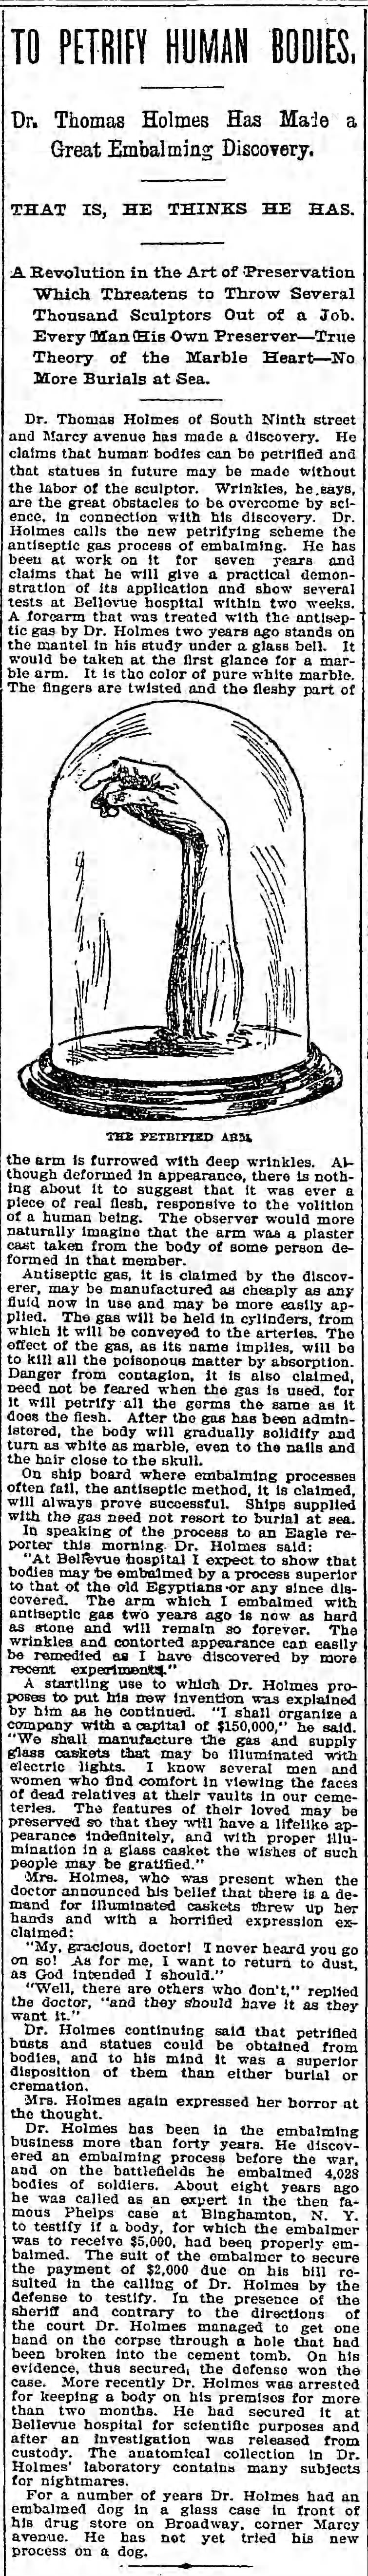 Dr. Thomas Holmes Has Made a Great Embalming Discovery 1895